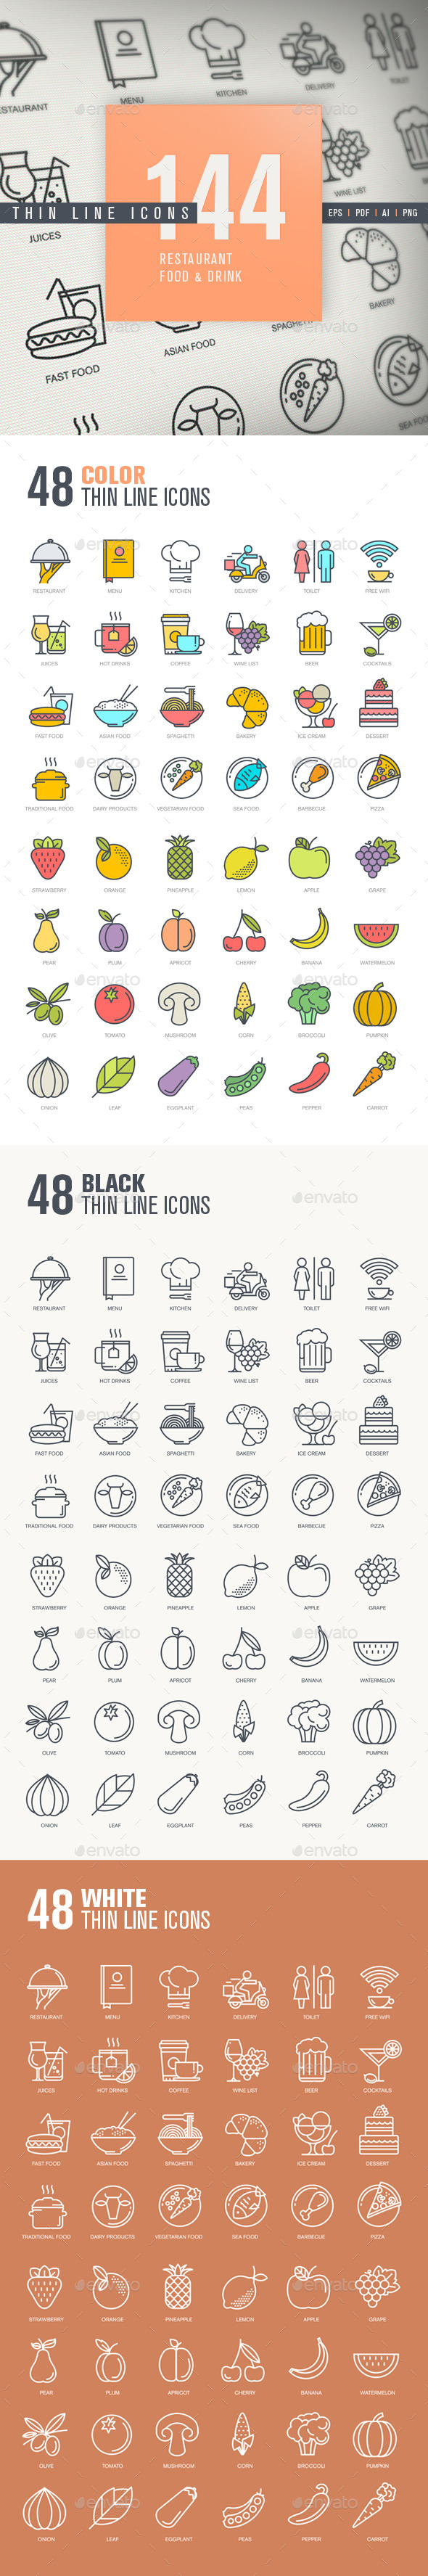 Thin Line Icons for Restaurant, Food & Drink